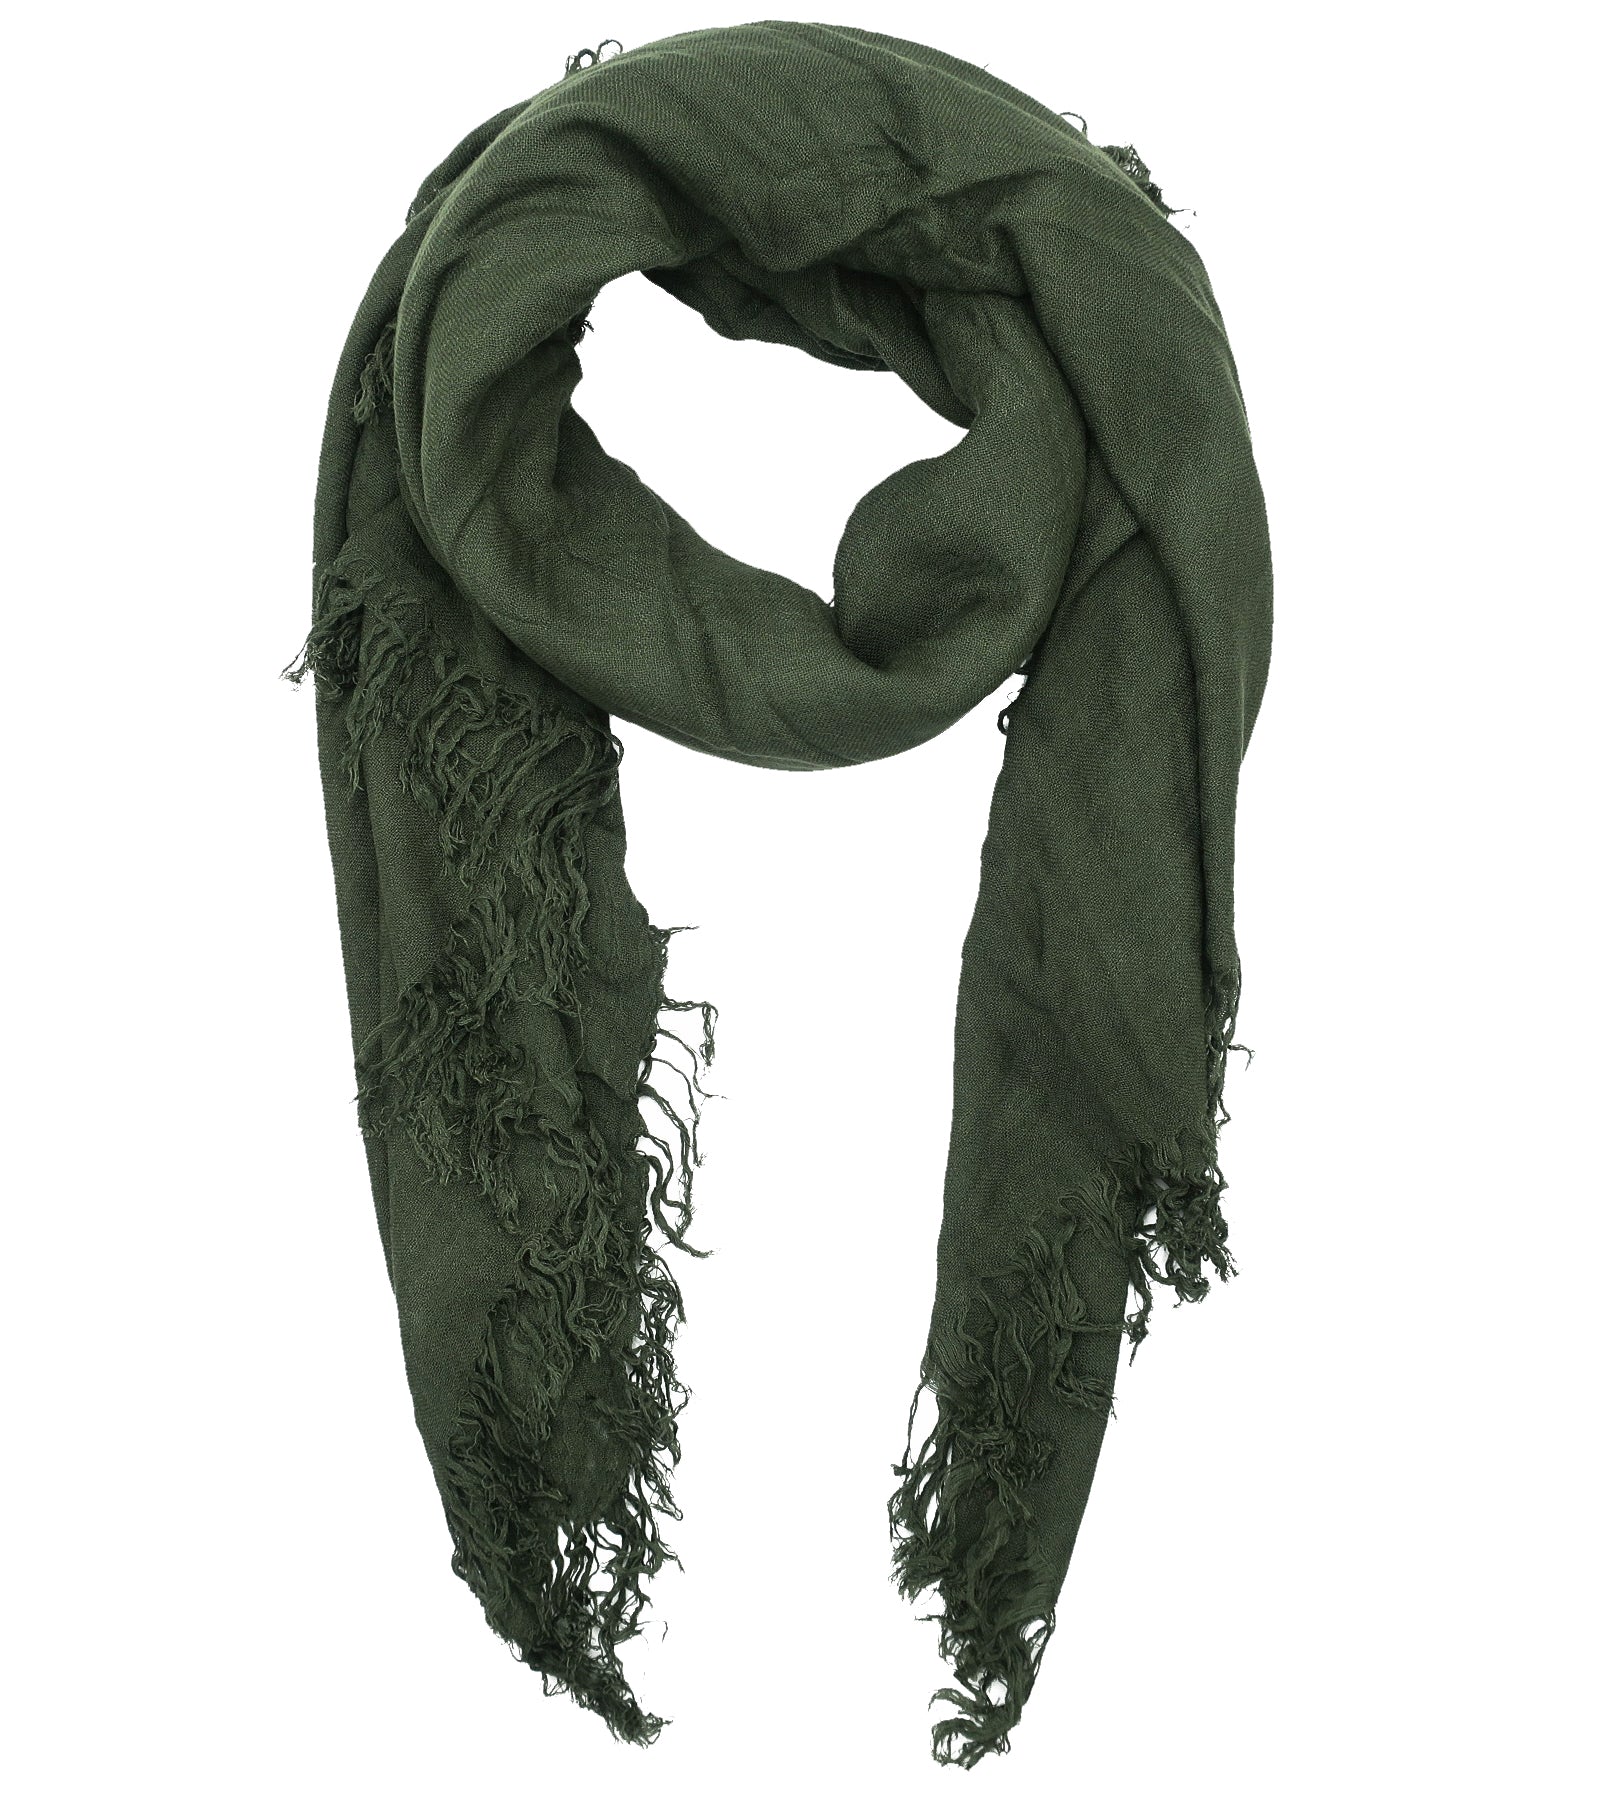 Blue Pacific Tissue Solid Modal and Cashmere Scarf in Deep Dark Forest Green